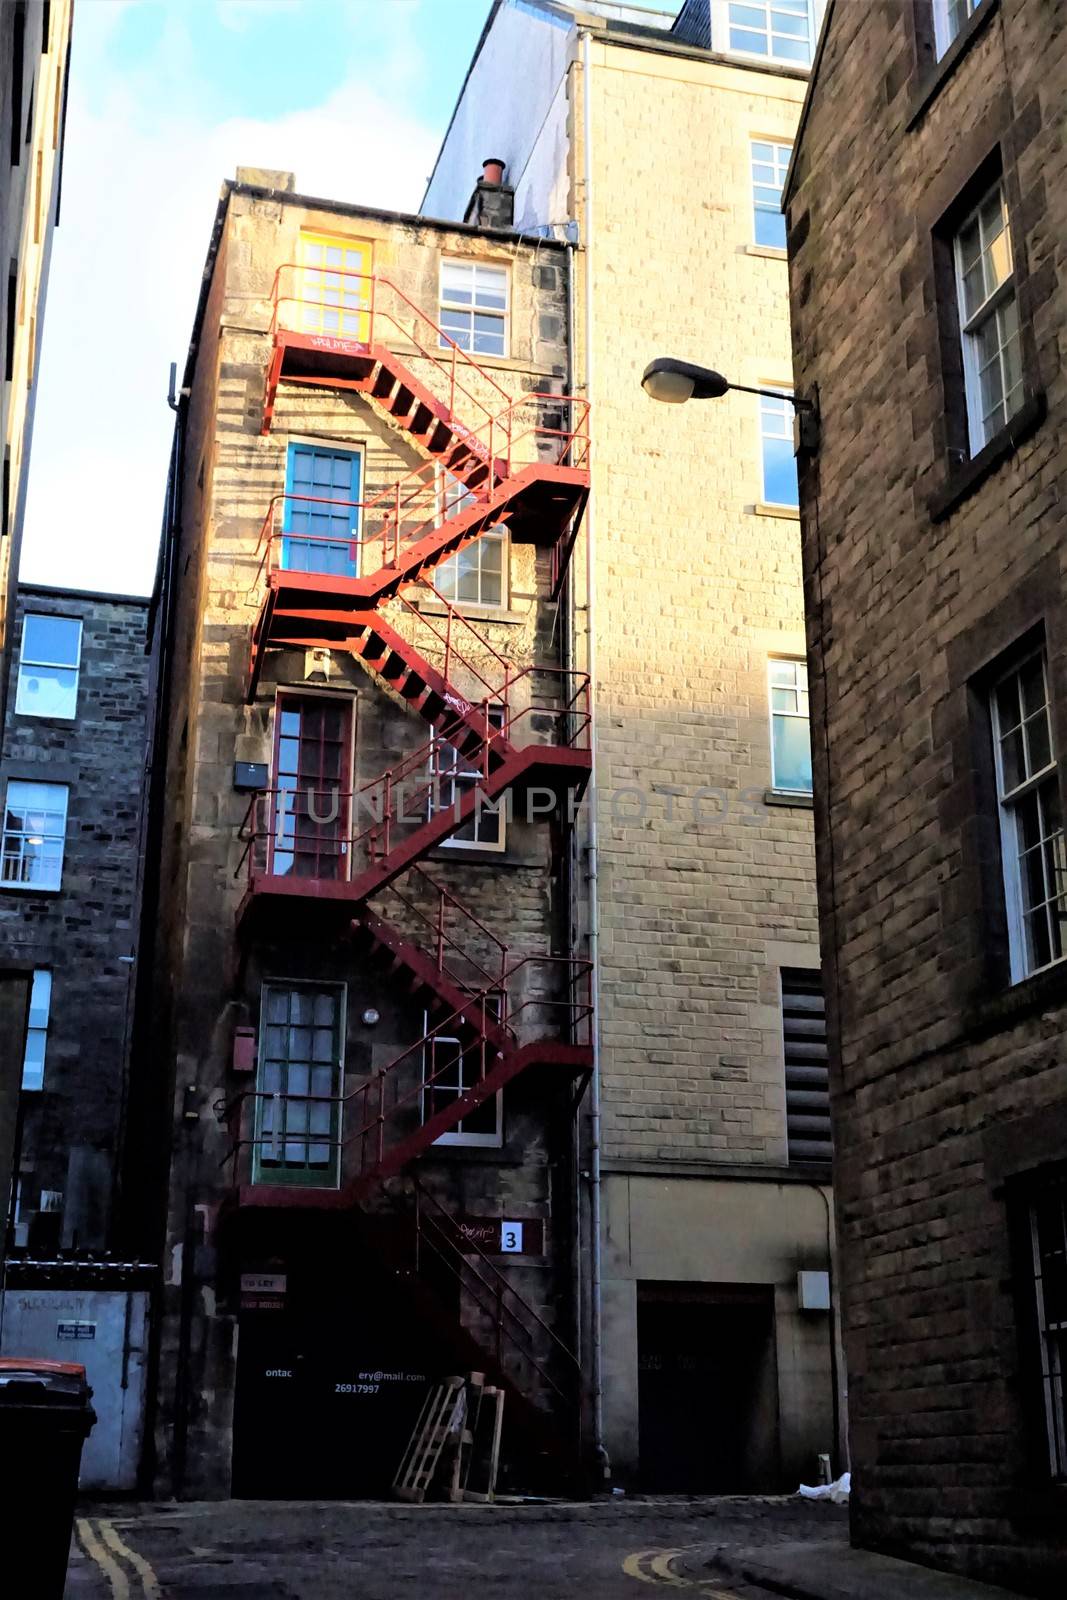 Brick house with fire escape in Edinburgh by pisces2386